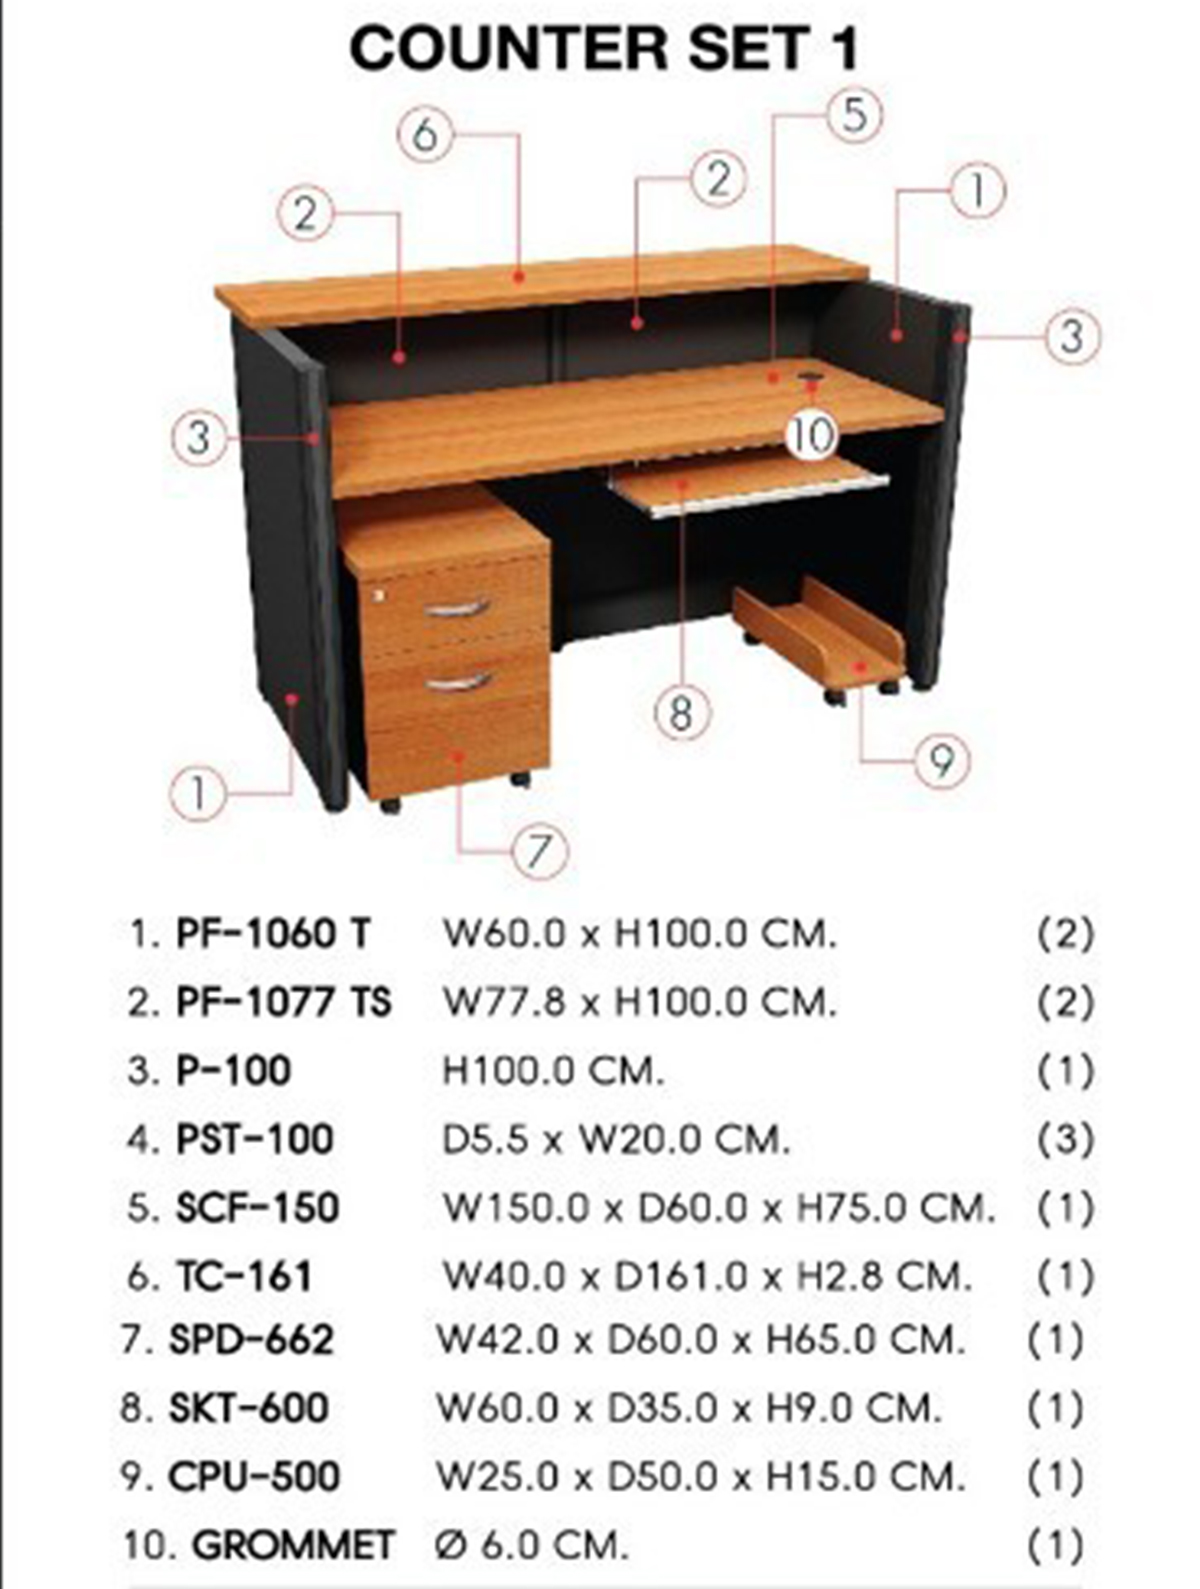 88084::WORKING-SET1::A Sure office set. Working-Set1 SURE Coun Table